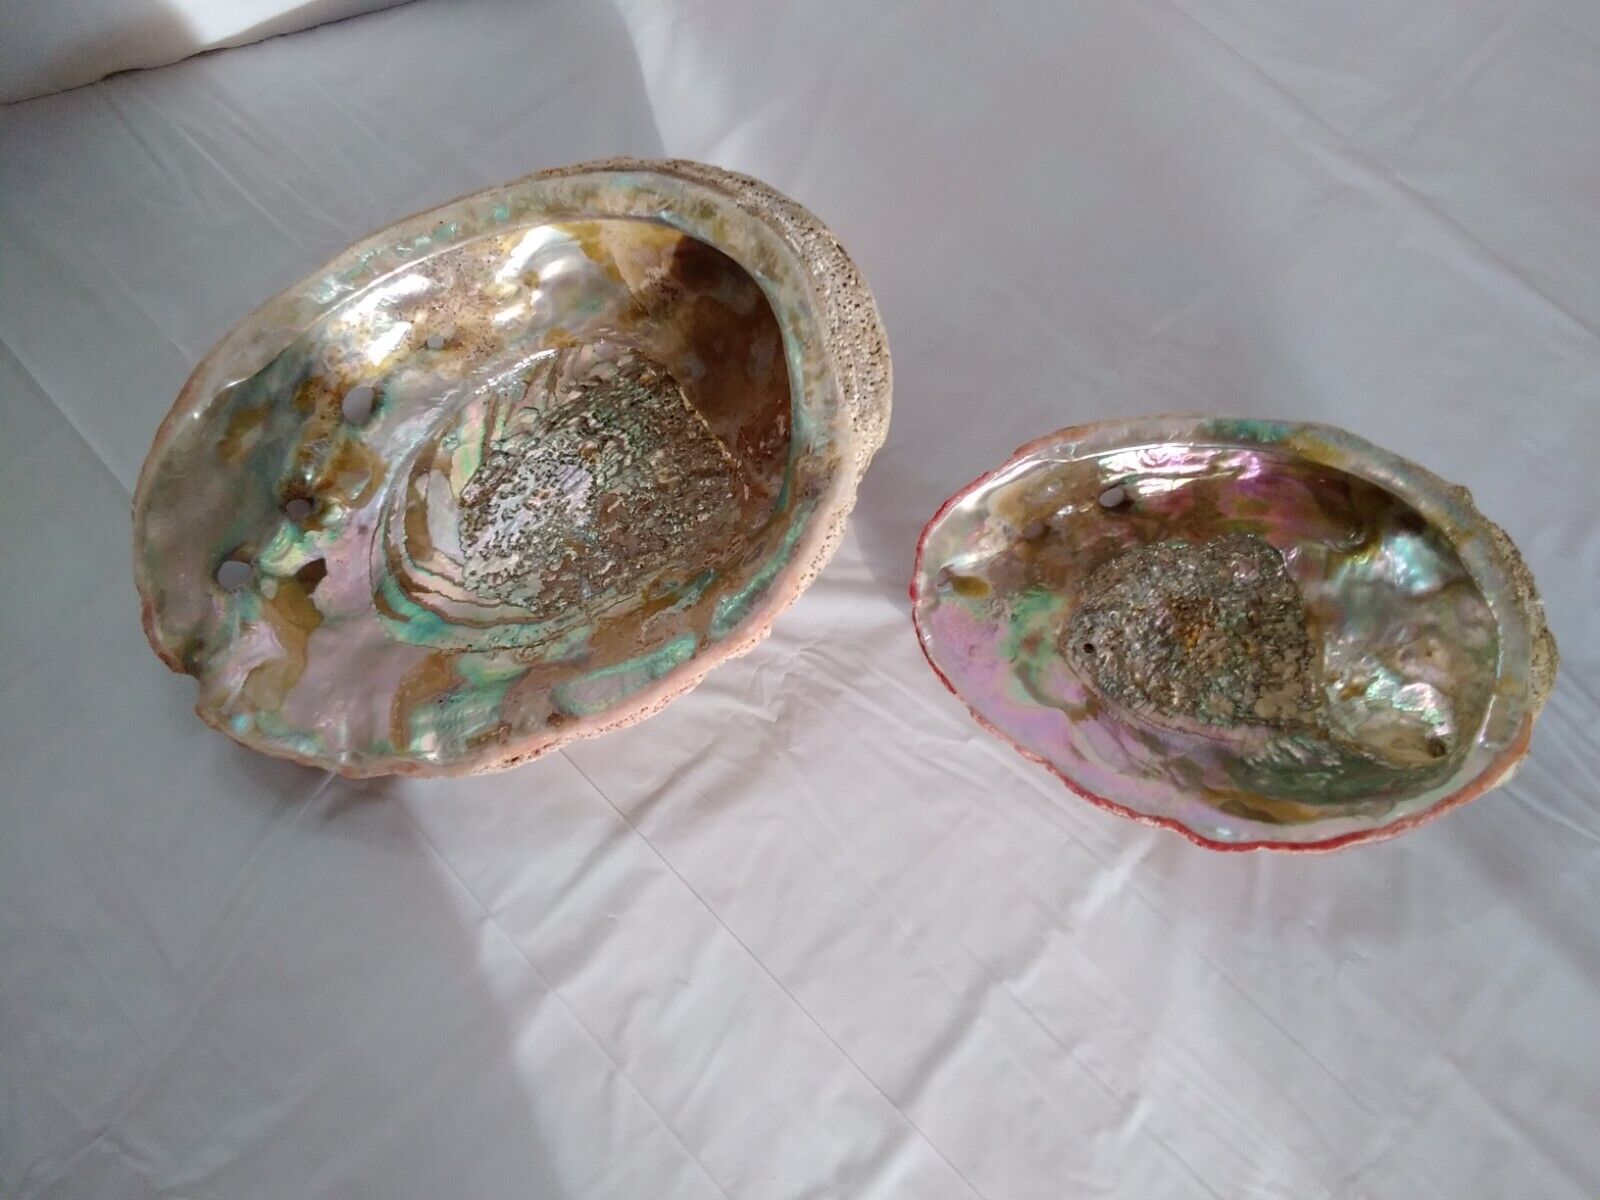 2 Abalone Shells Decor Healing Smudge Bowl Large Approximately 6in & 8in